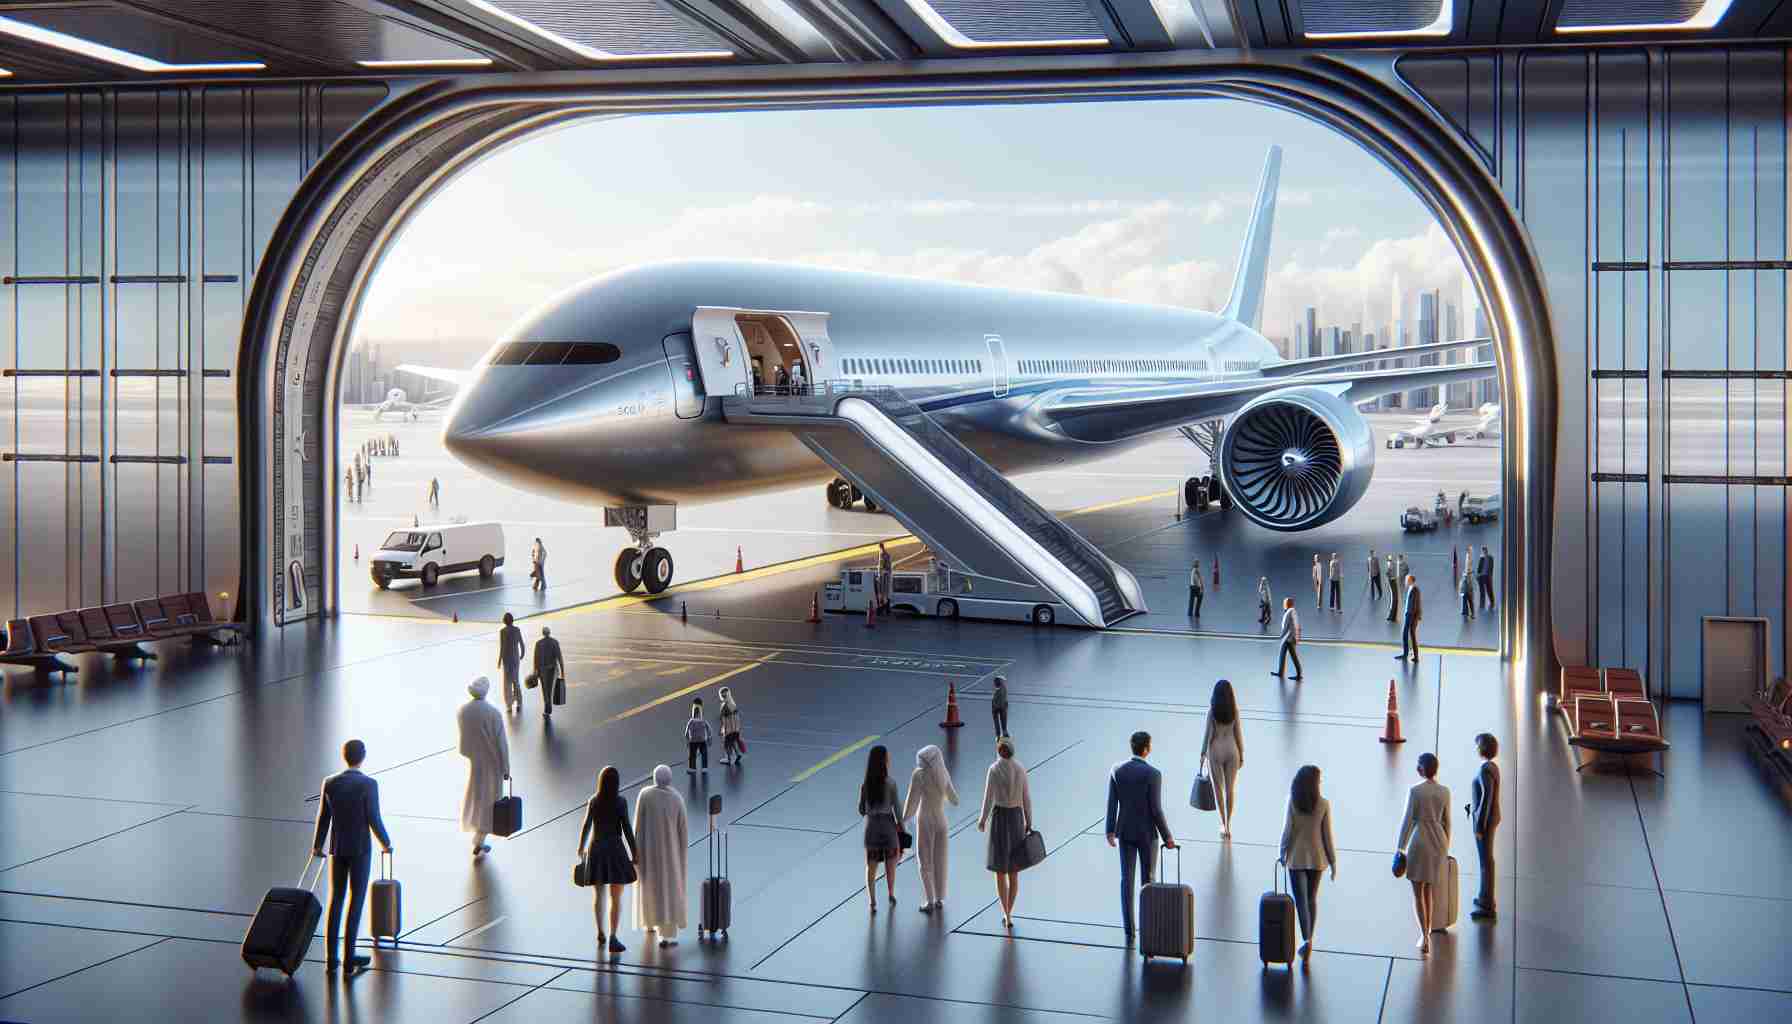 Imagine a glimpse into the future of commercial air travel. Picture a detailed, high-definition scene with a sleek, futurist aeroplane resting on the tarmac, its structure immaculate and polished, embodying state-of-the-art technology. The plane's spacious, comfortable interior is visible through large, open doors, offering a sneak peek into an airline experience that is yet to come. Anticipation is in the air, as a diverse group of passengers, including a Middle-Eastern male senior citizen, a young Caucasian woman, and a Hispanic boy, are boarding the aircraft, their faces full of excitement and curiosity.